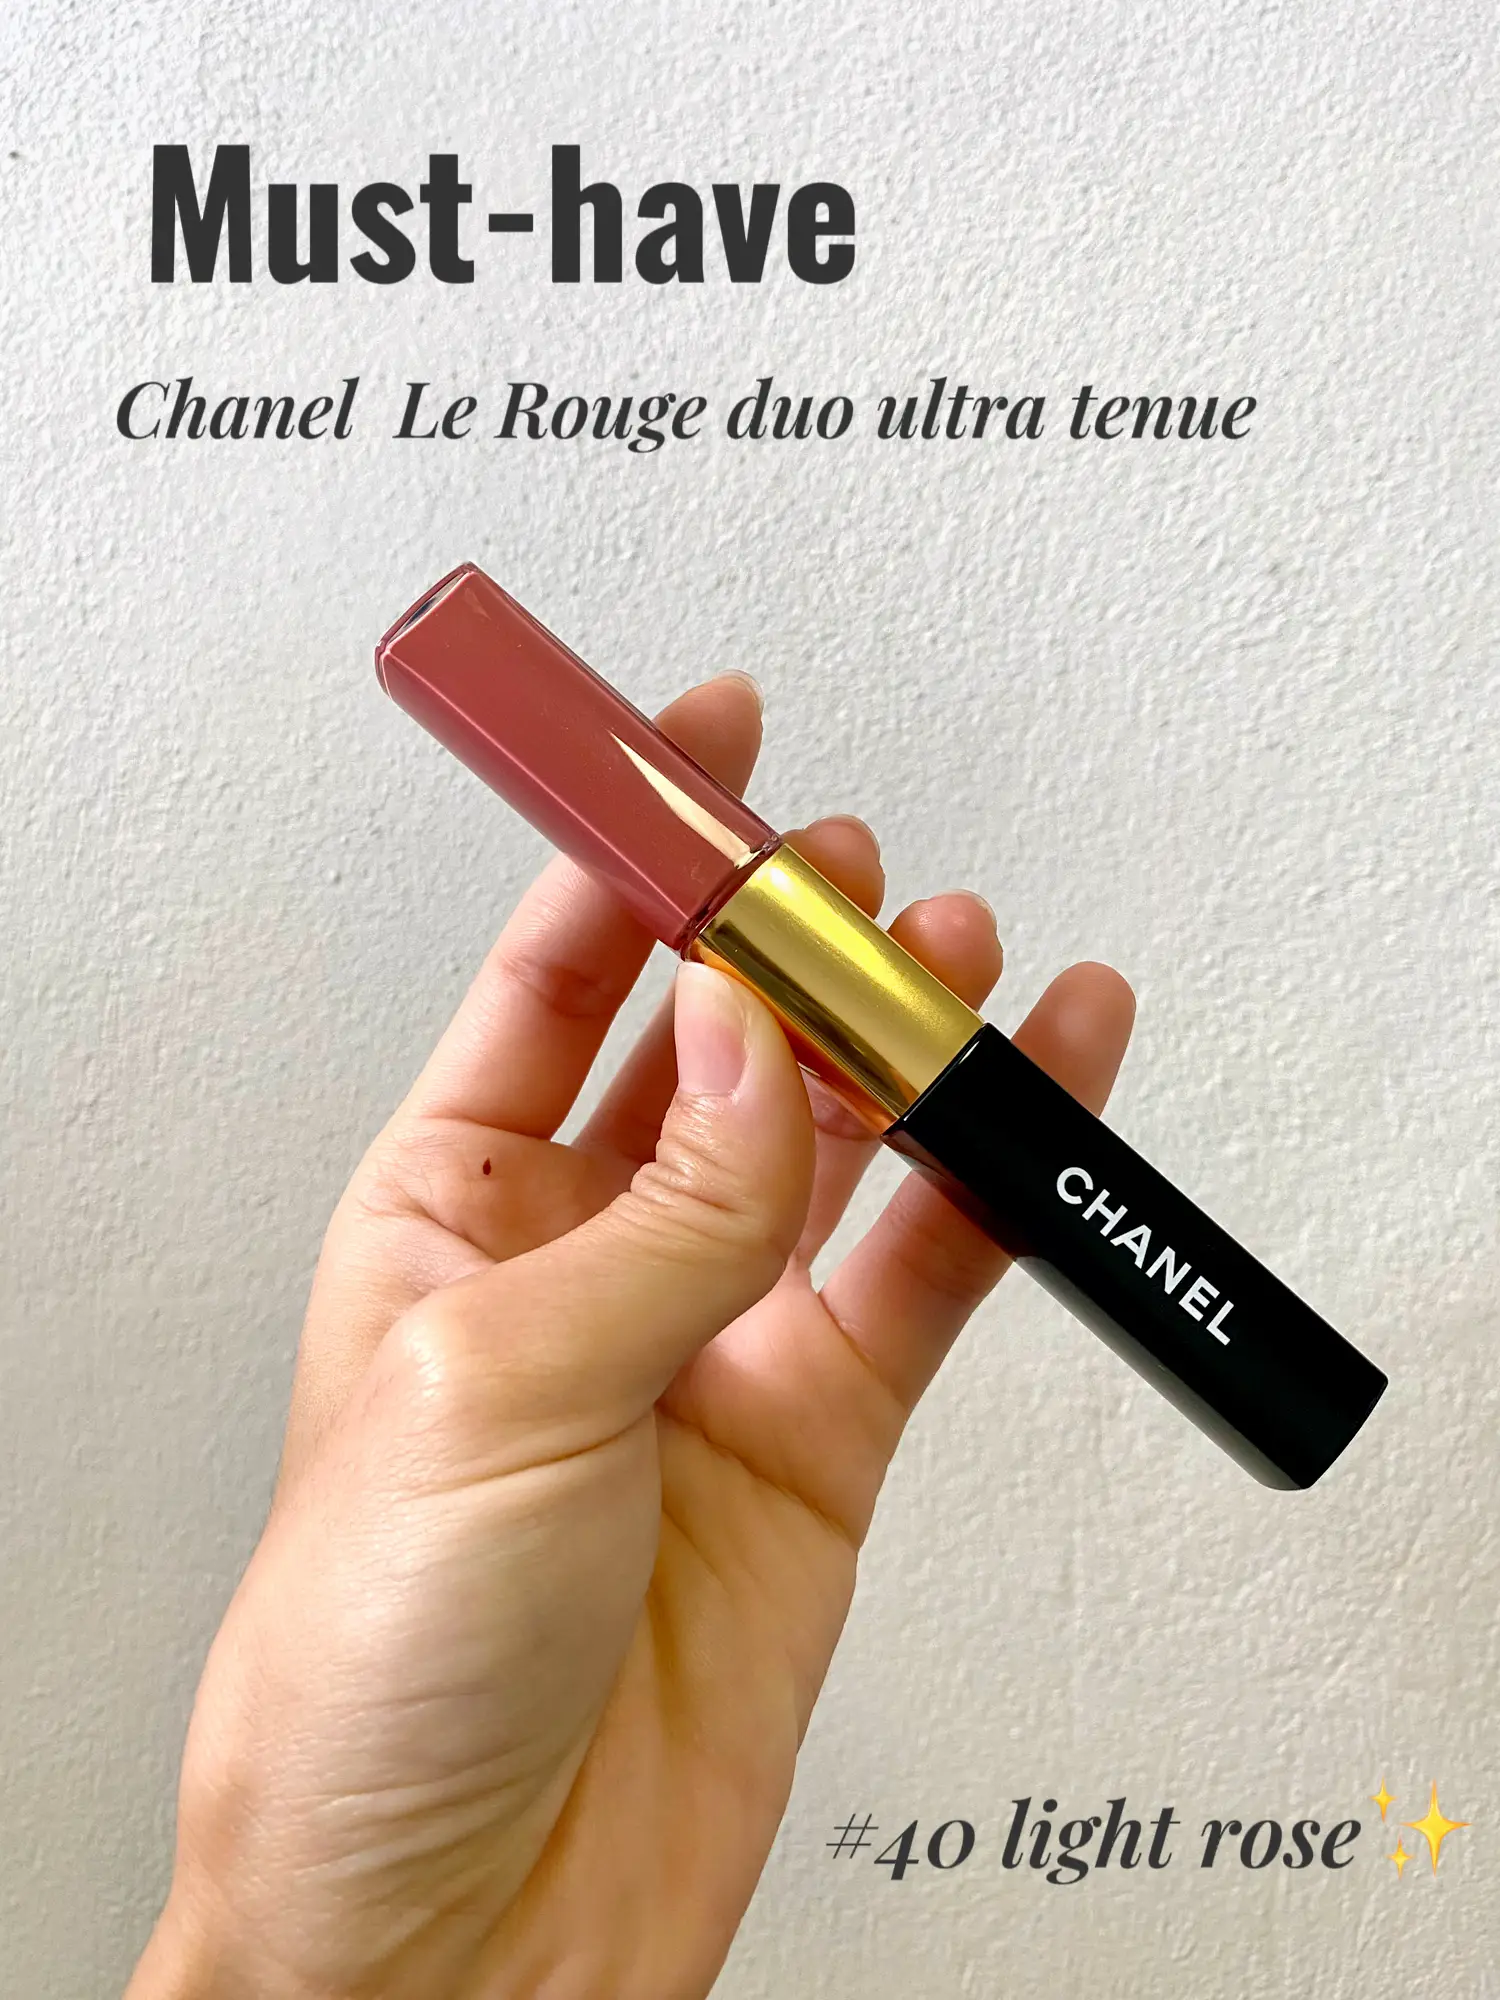 le rouge duo ultra tenue